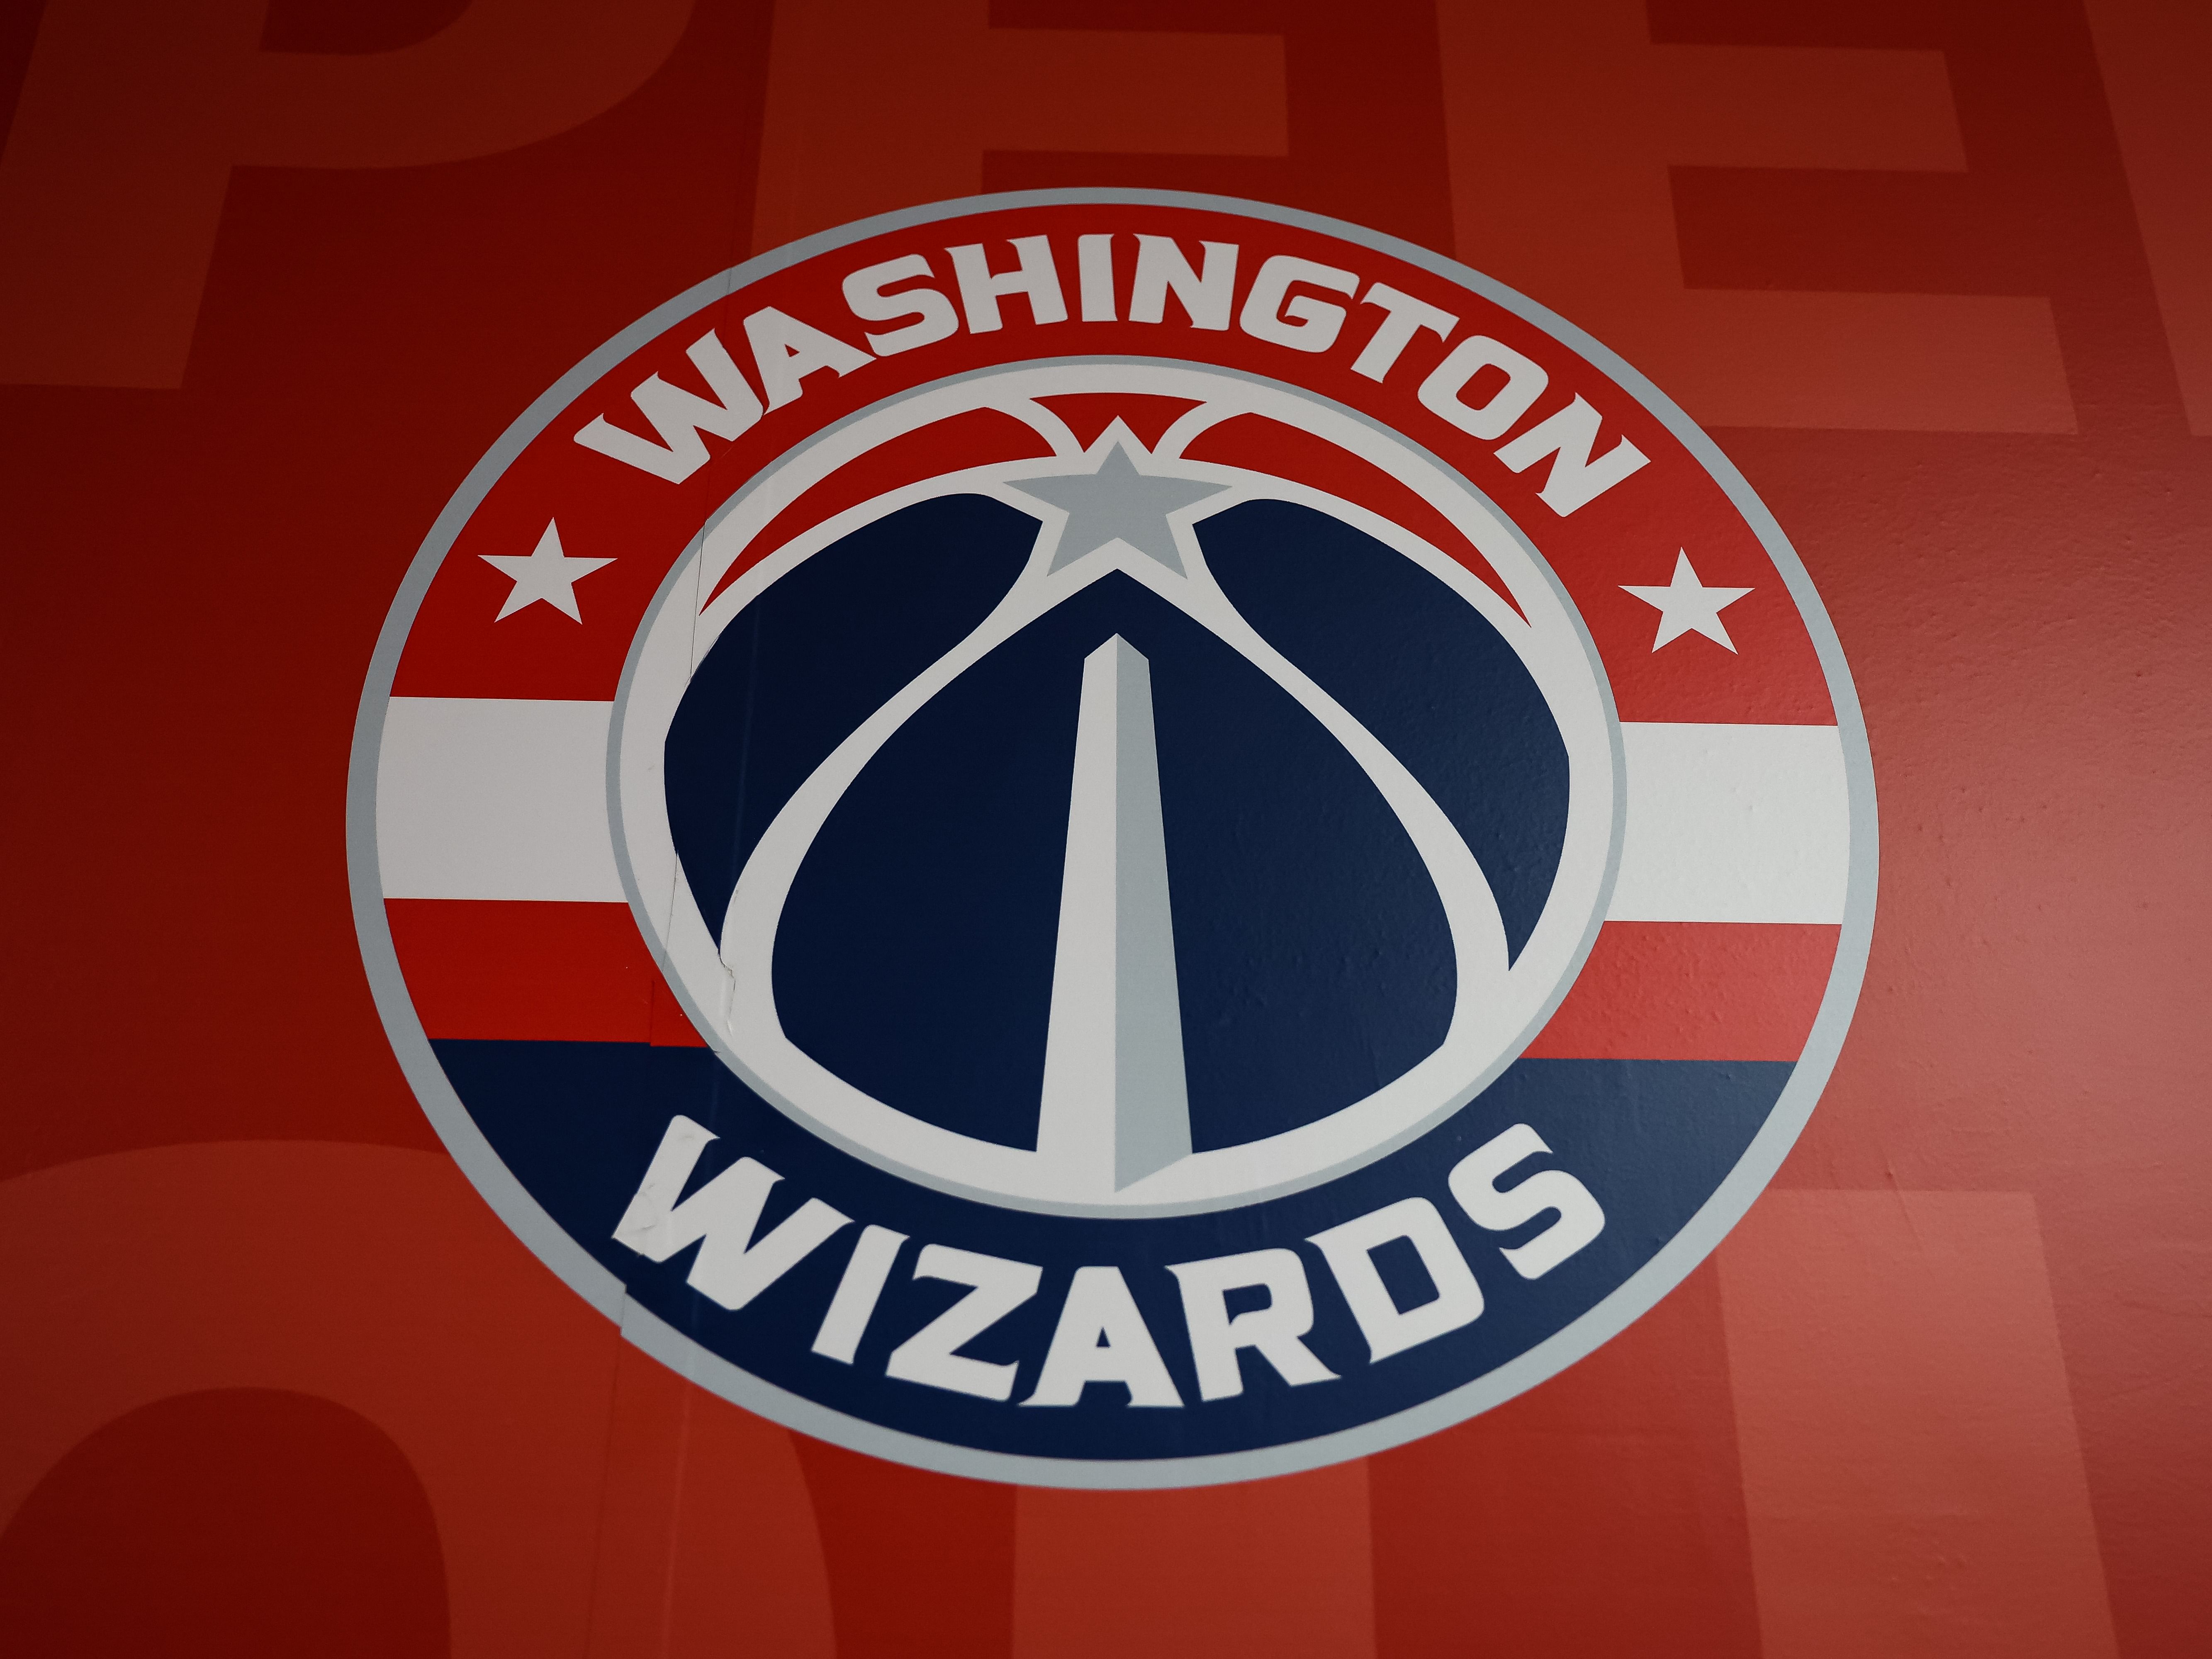 Michael Winger interviews for Washington Wizards GM role